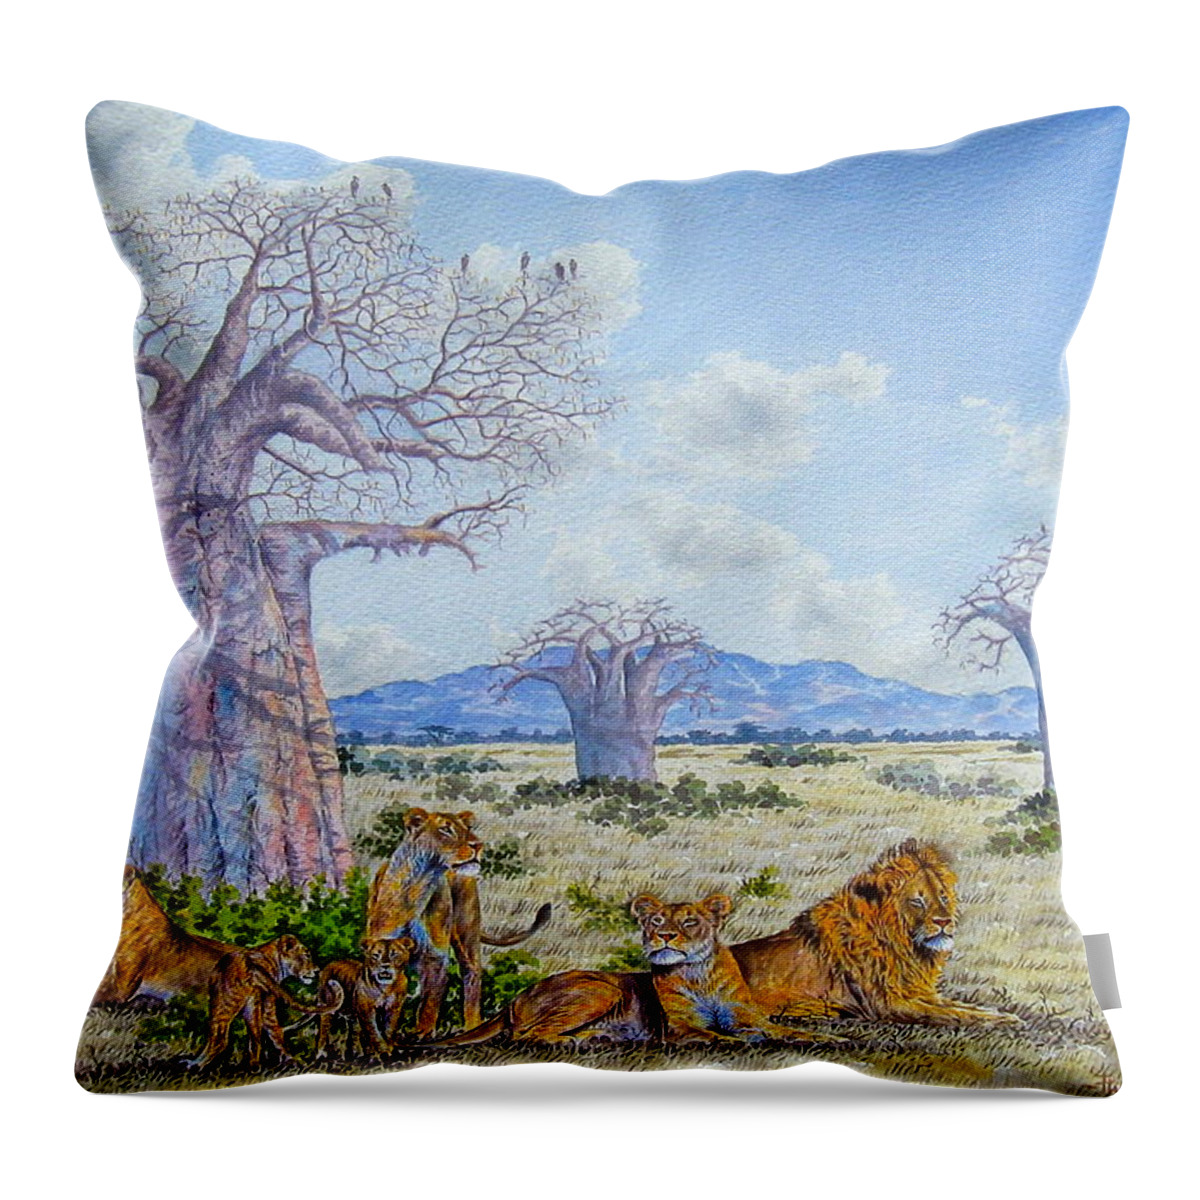 African Paintings Throw Pillow featuring the painting Lions by the Baobab by Joseph Thiongo